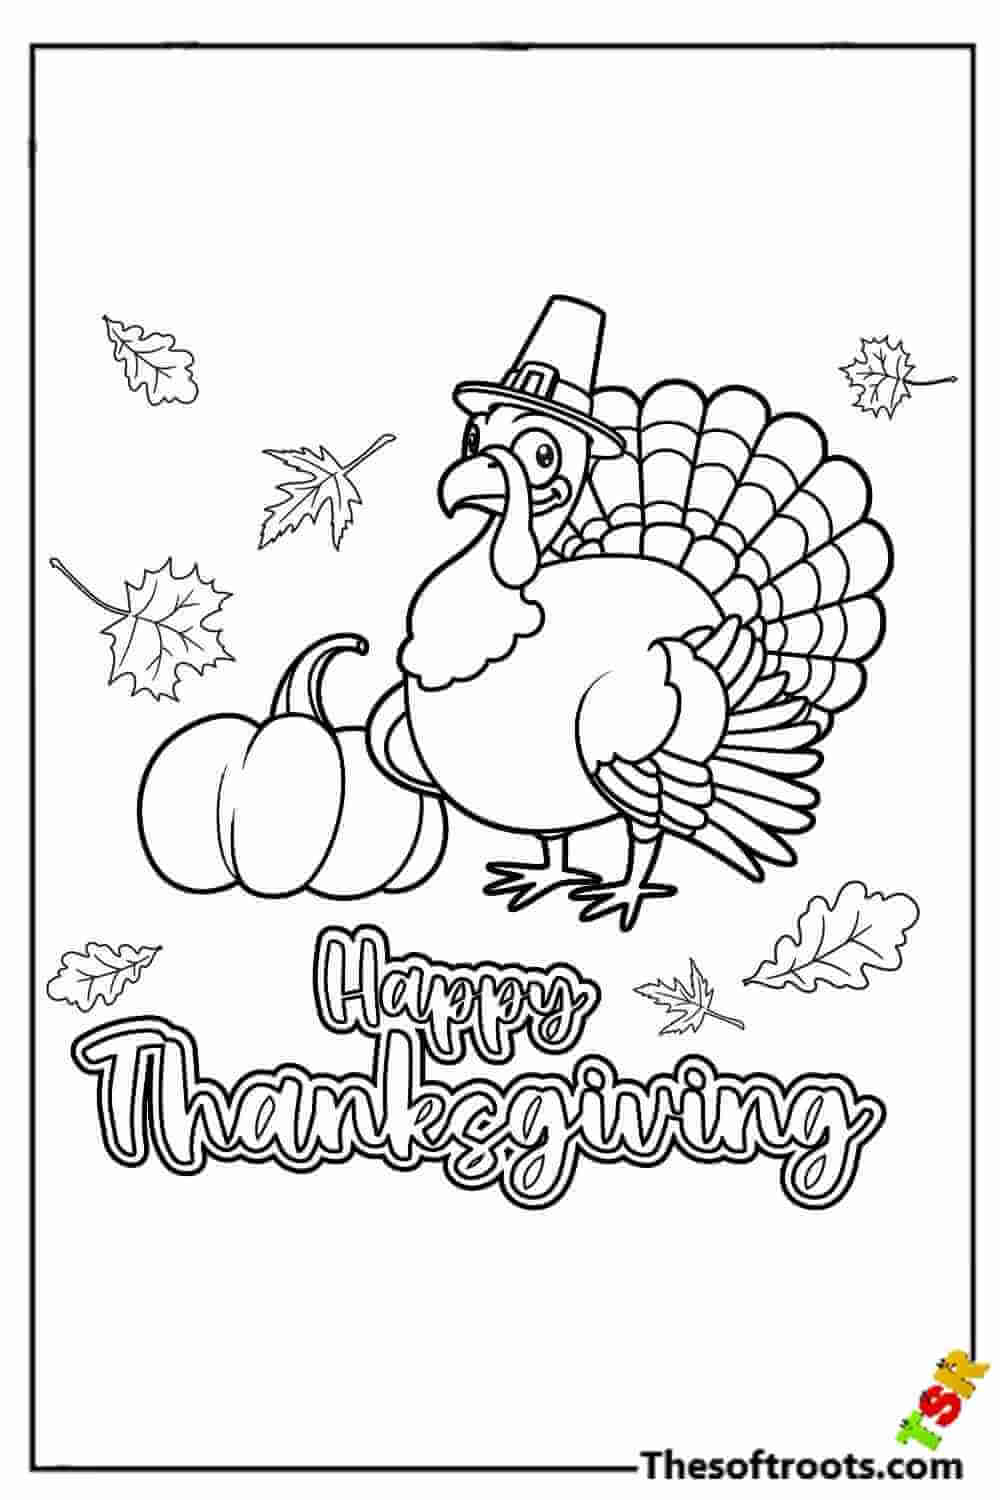 Wish turkey for adults coloring pages